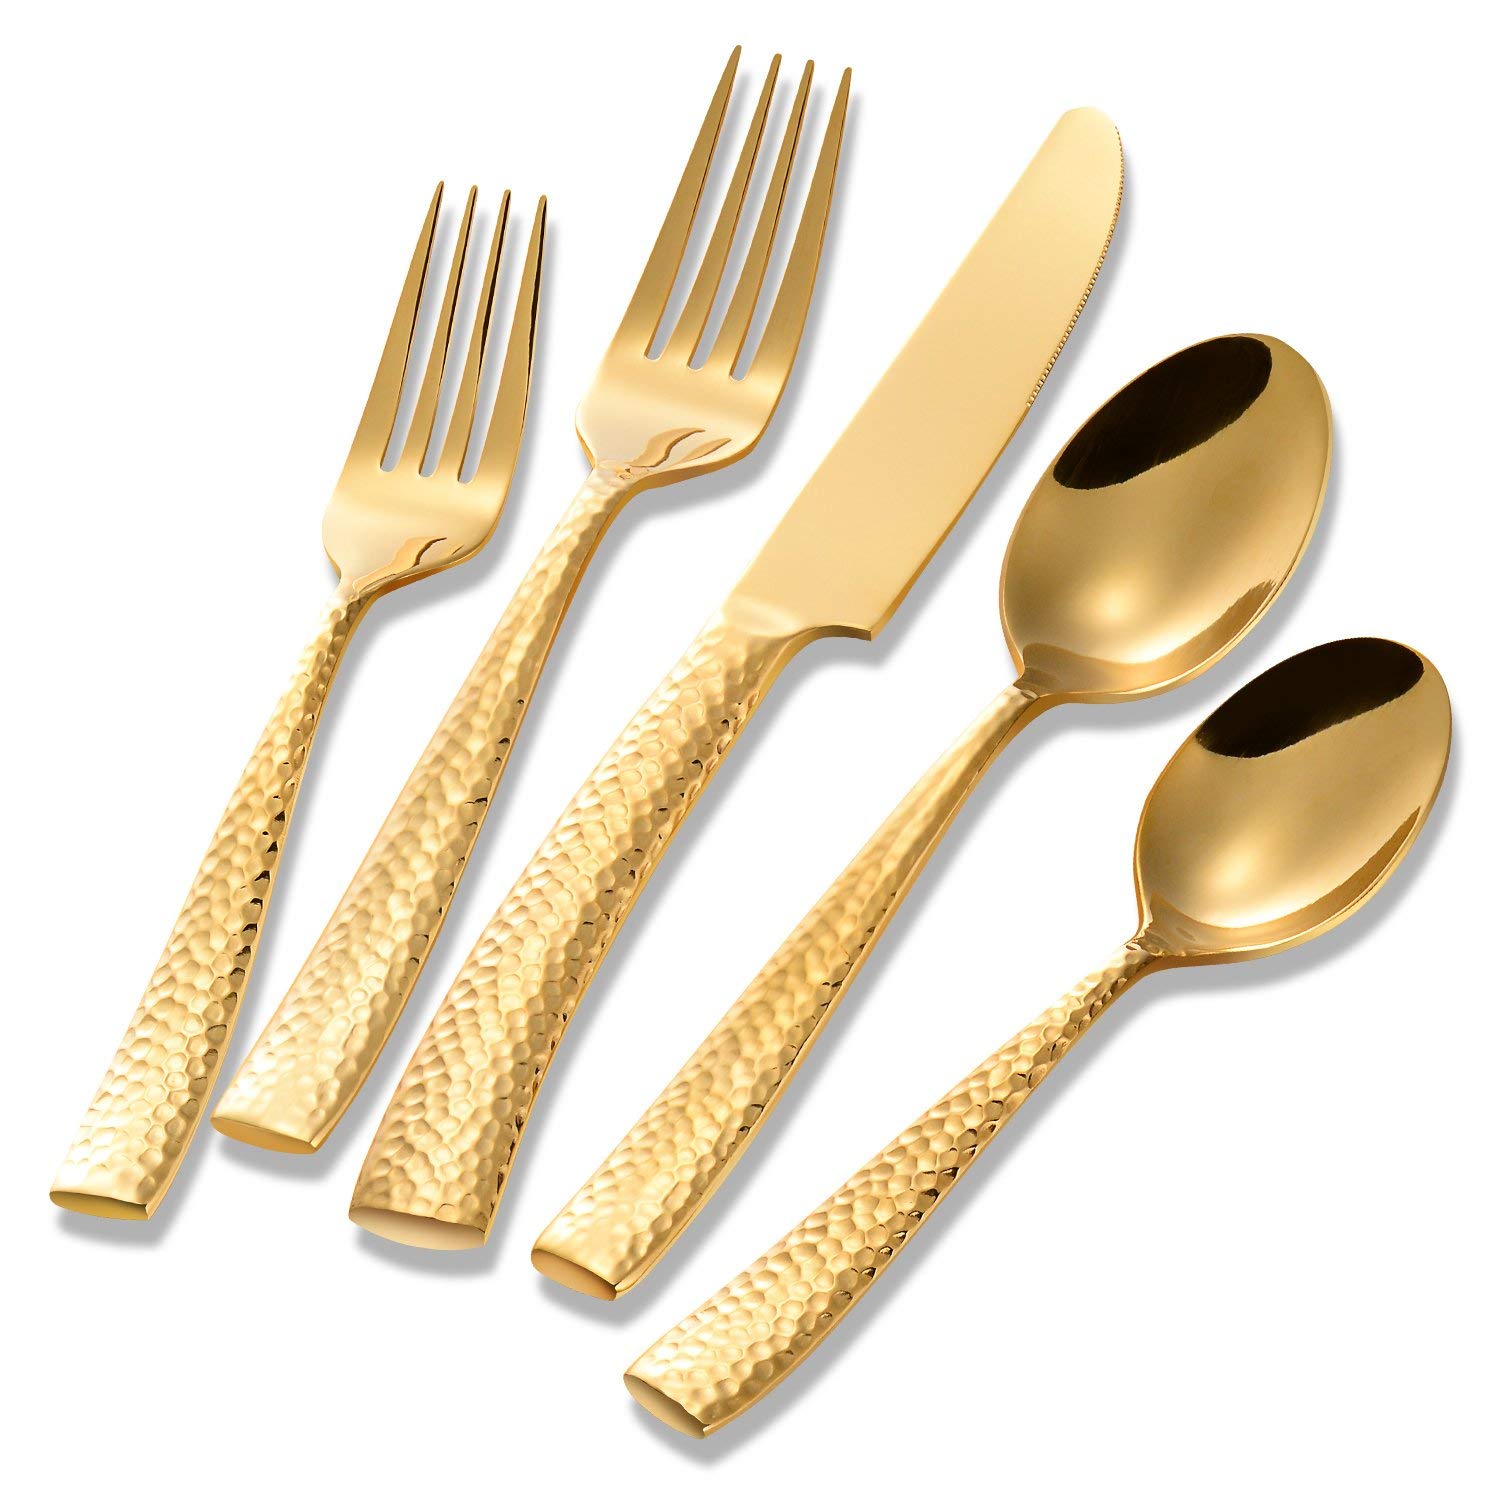 Cordell Cc Spoon Hammered 3-4 2pk Gold